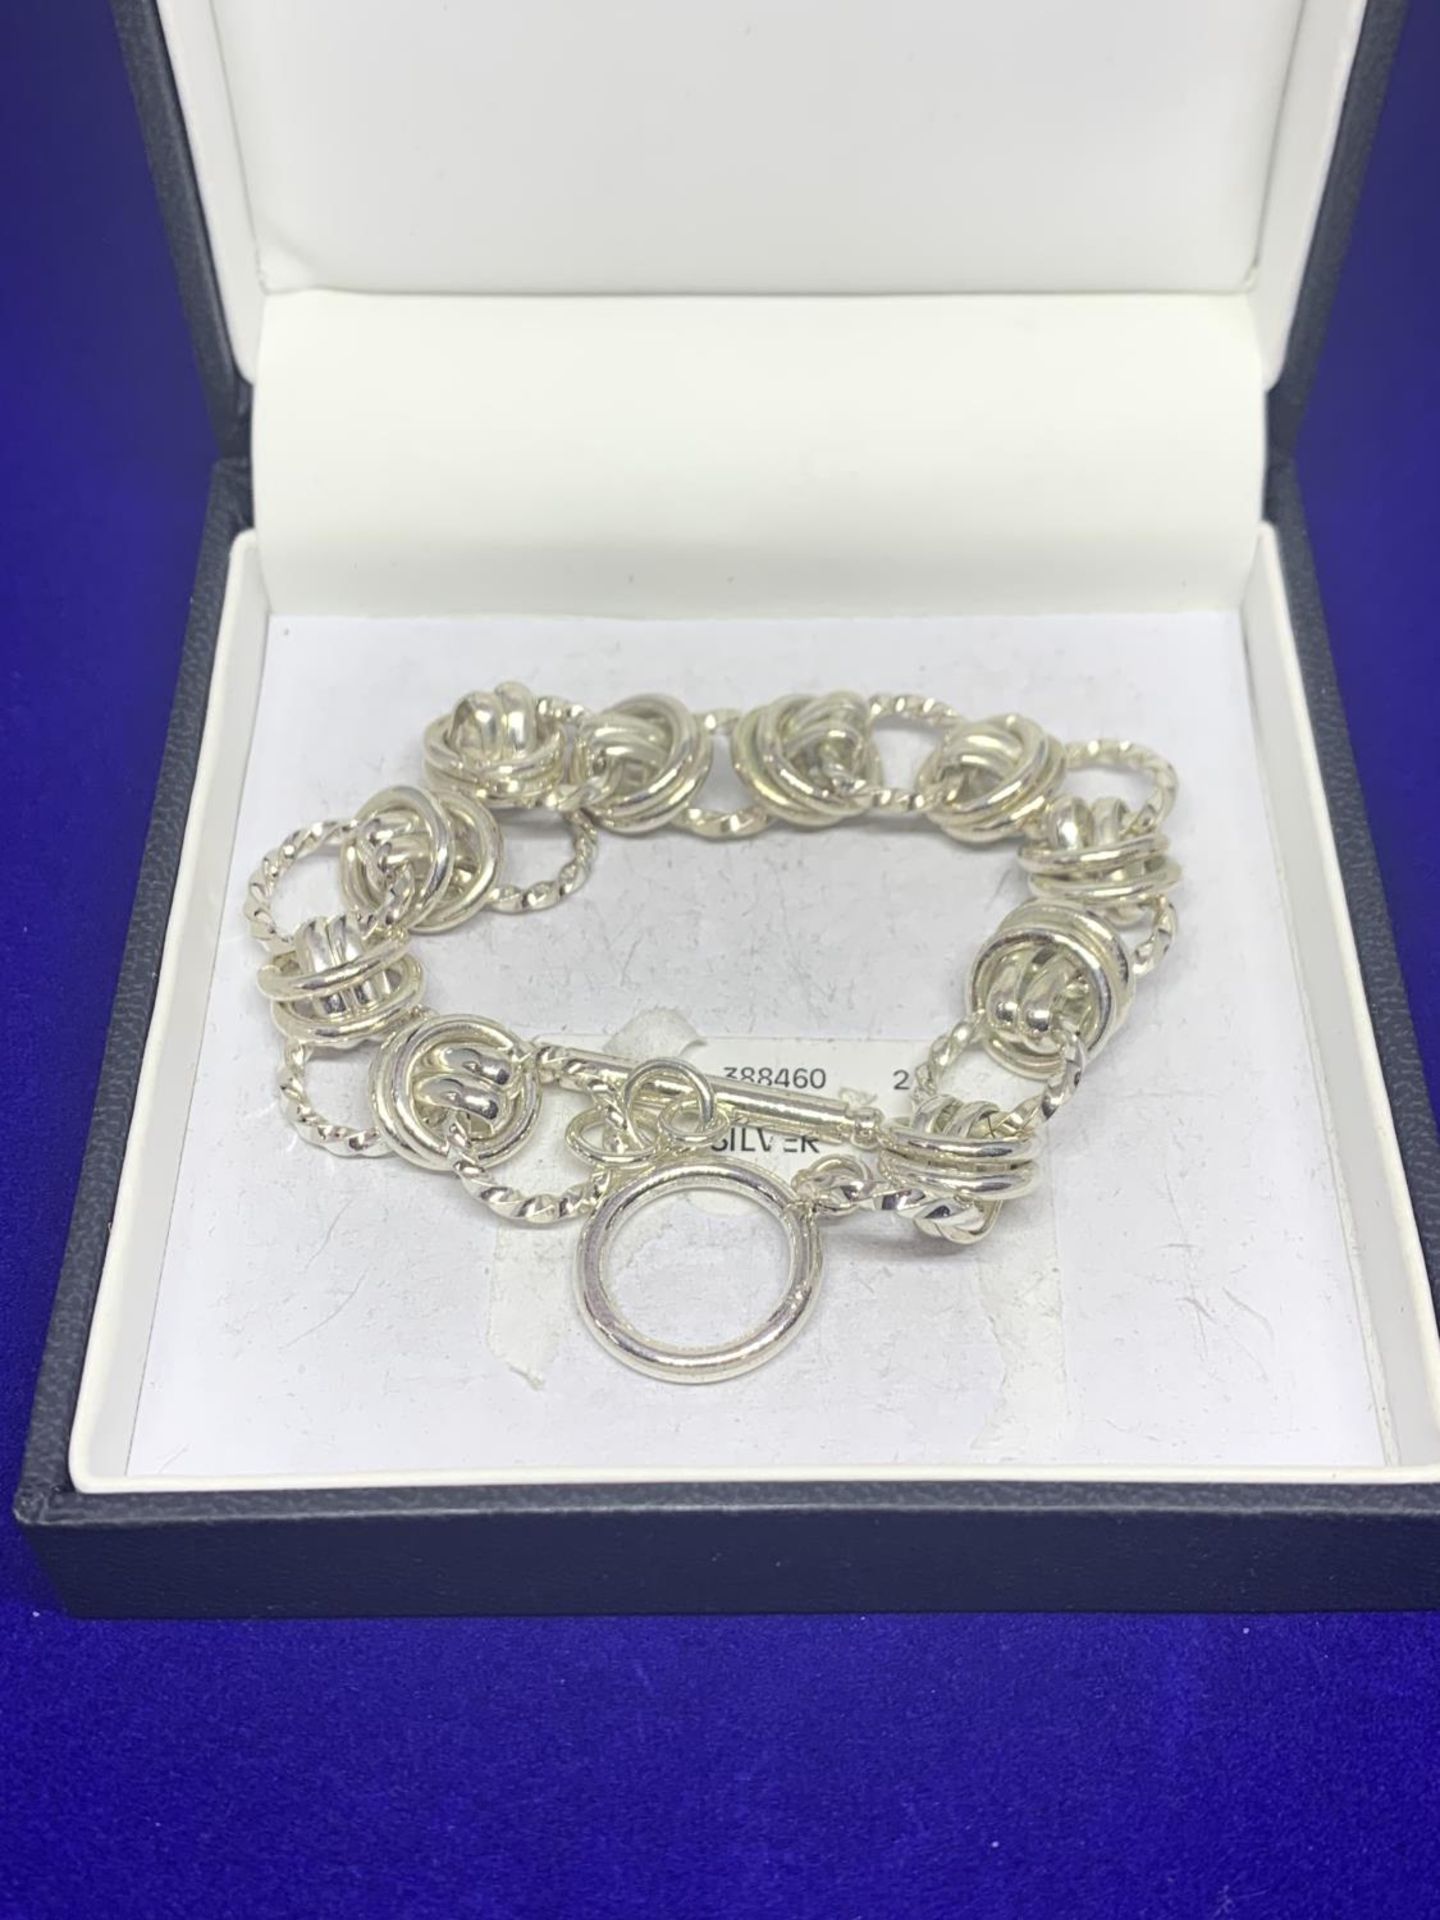 A HEAVY SILVER BRACELET MARKED 925 IN A PRESENTATION BOX - Image 3 of 3